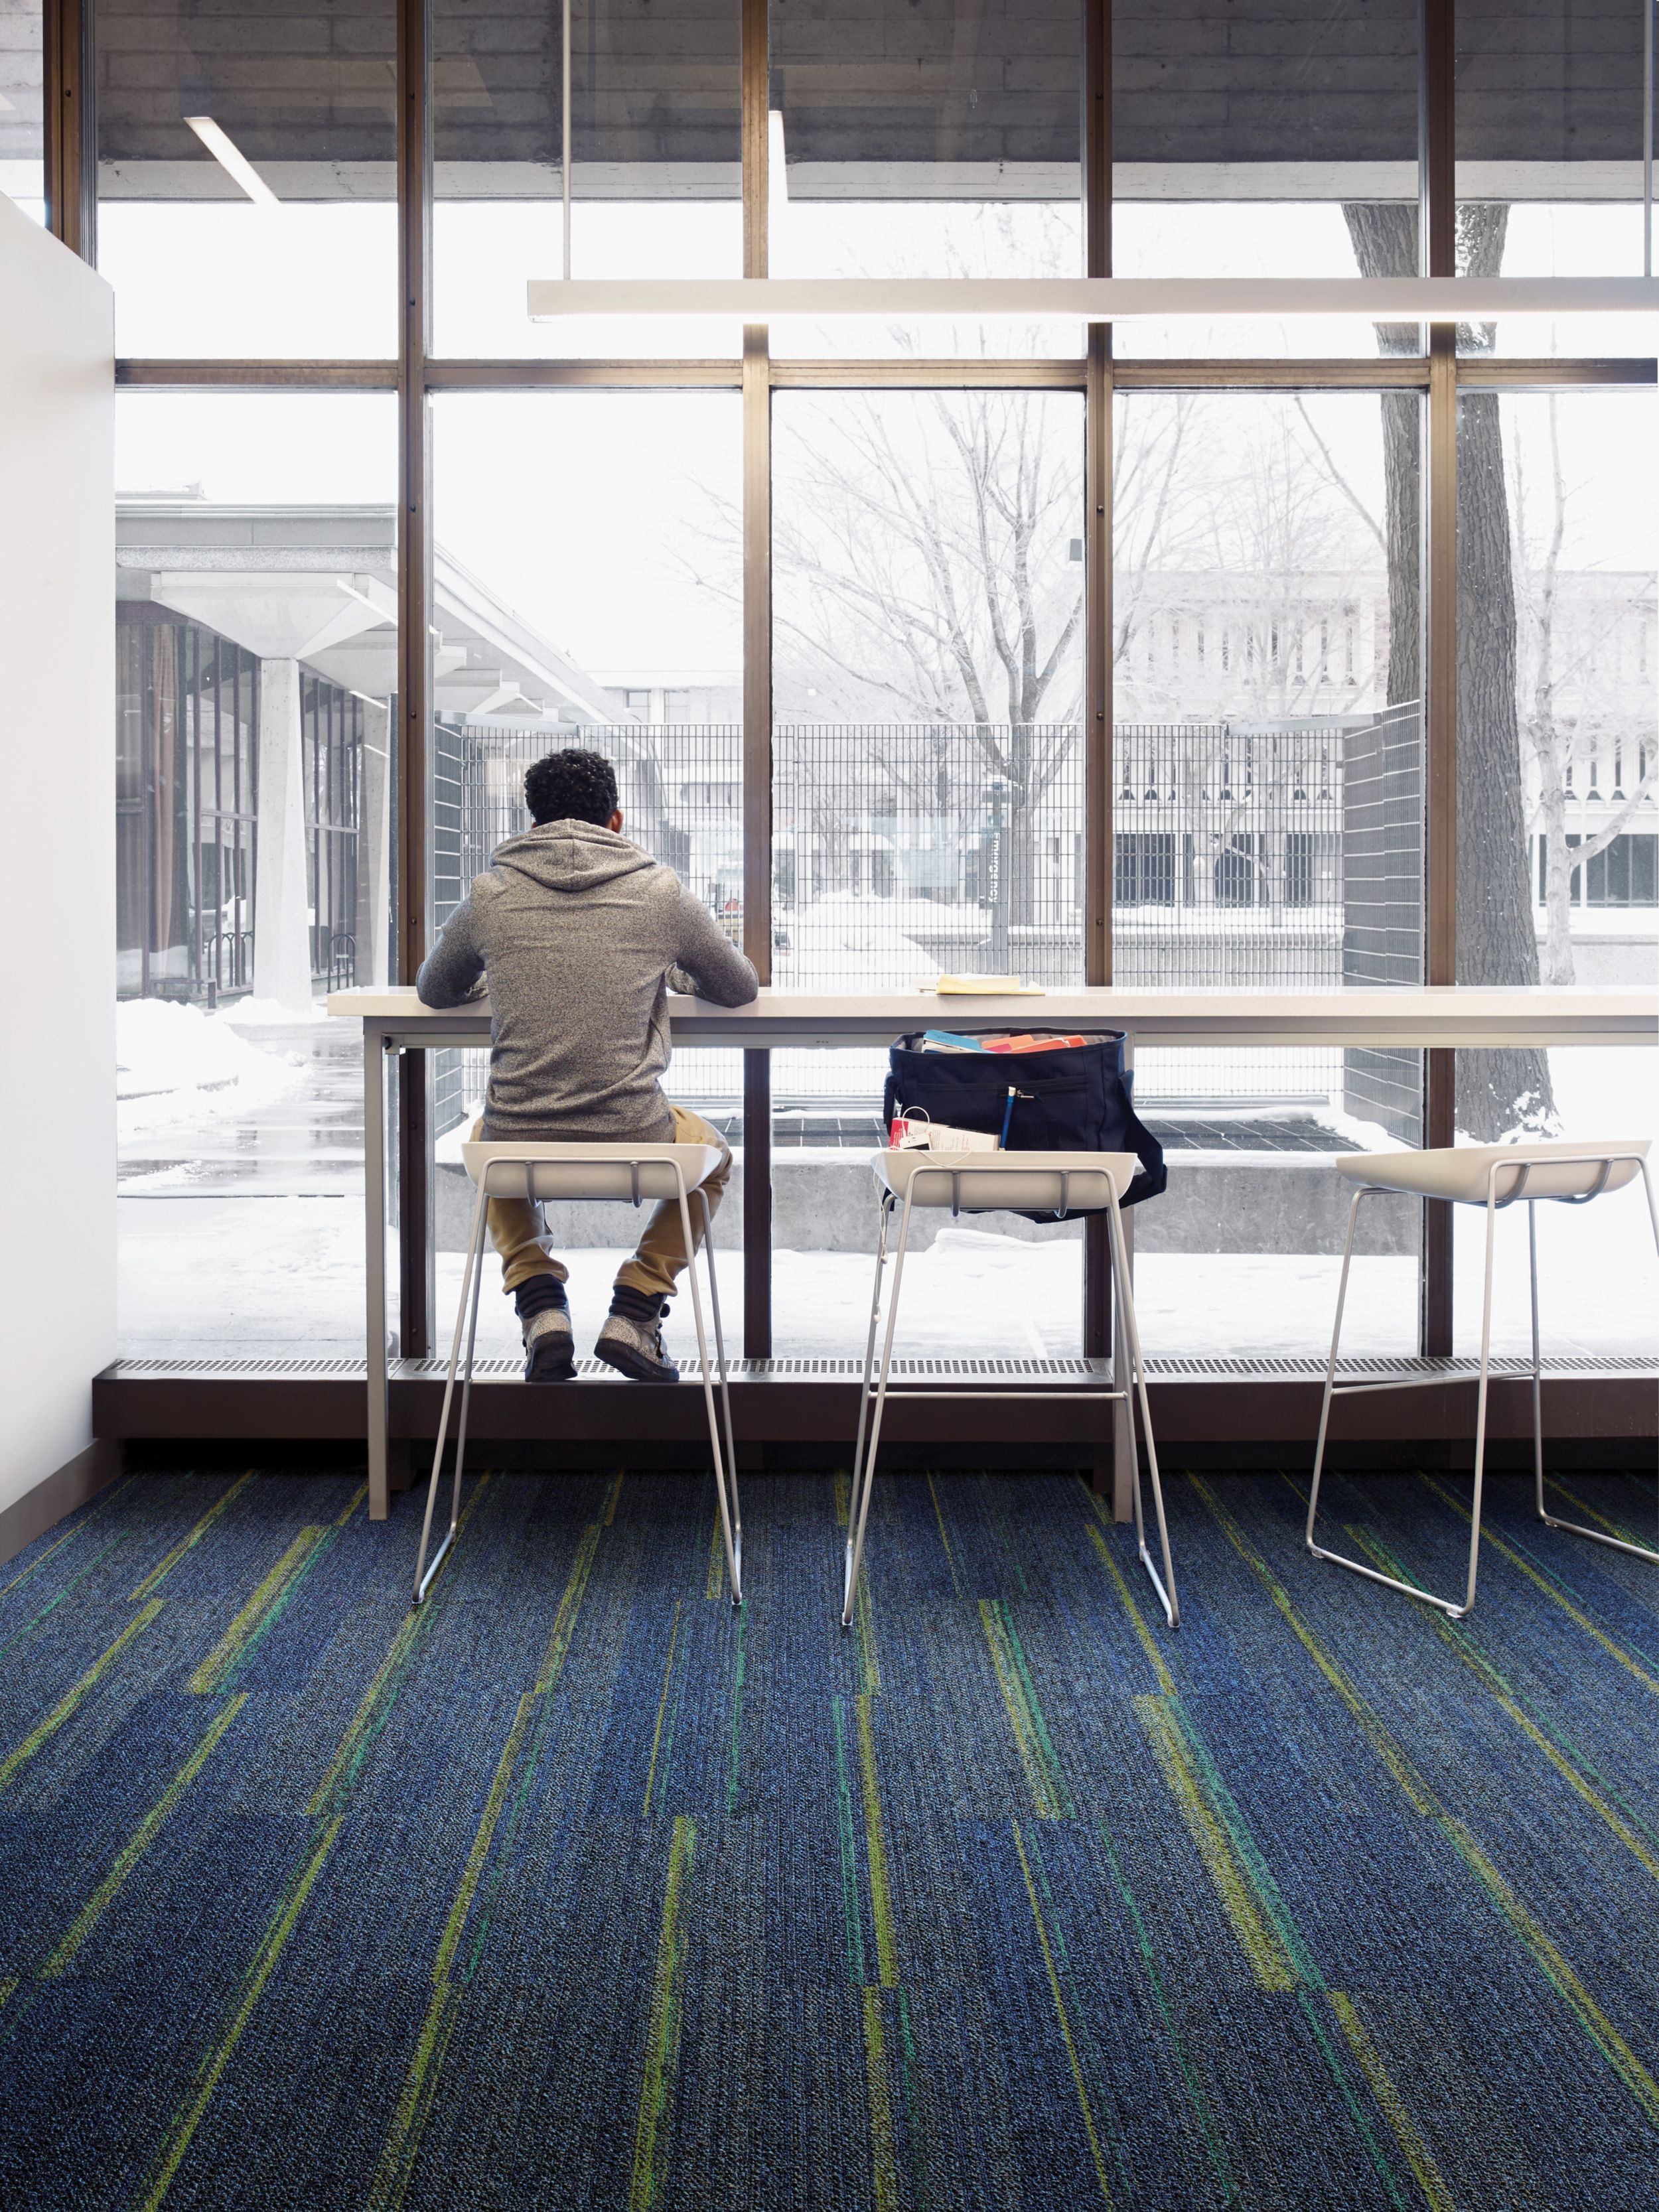 Interface Ground Waves plank carpet tiles in open area with student seated on stool imagen número 11